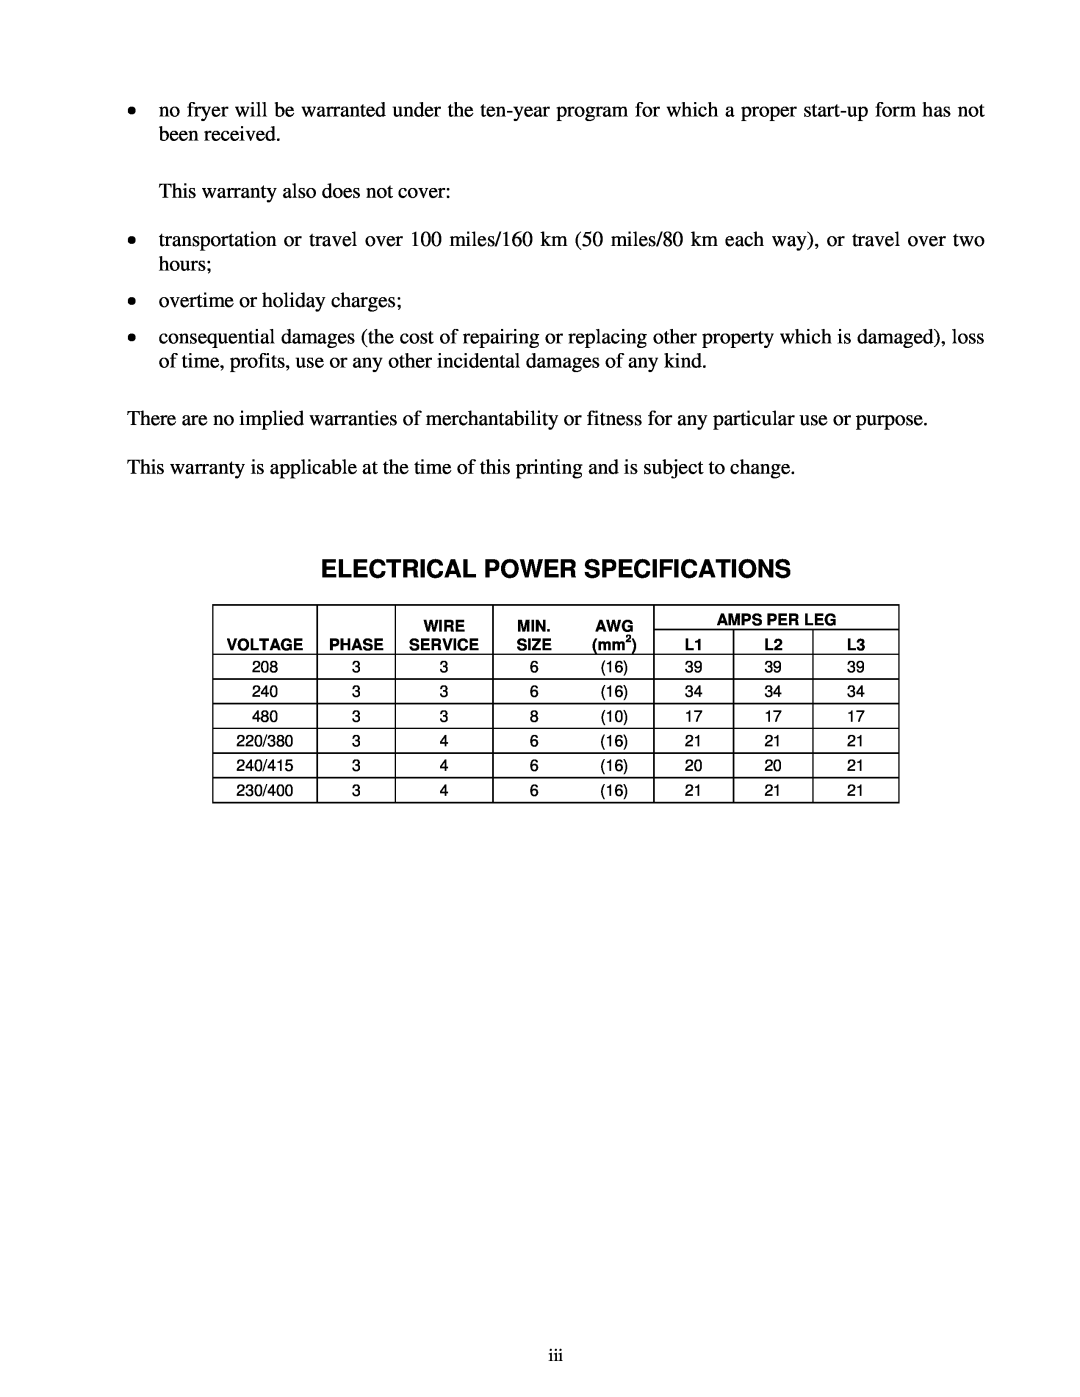 Frymaster BIELA14 manual Electrical Power Specifications 